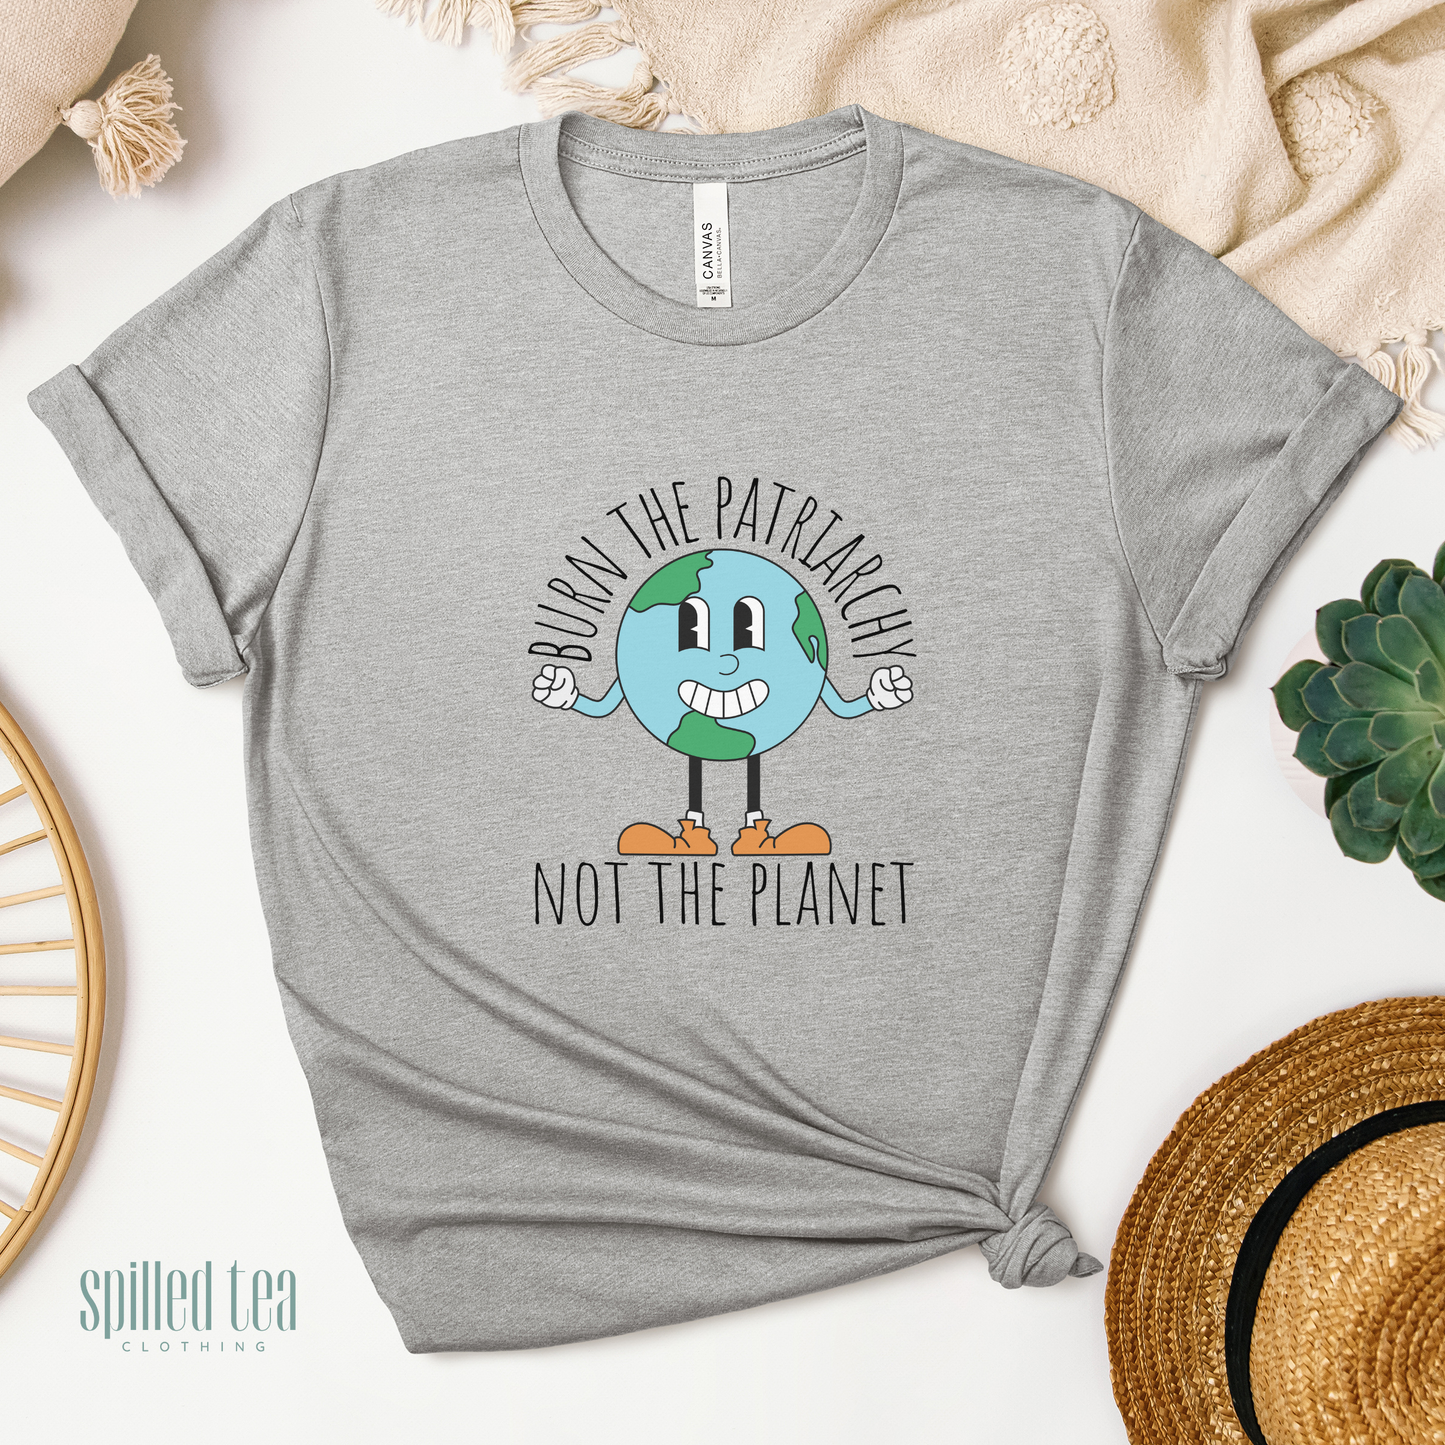 Burn The Patriarchy, Not The Planet T-Shirt